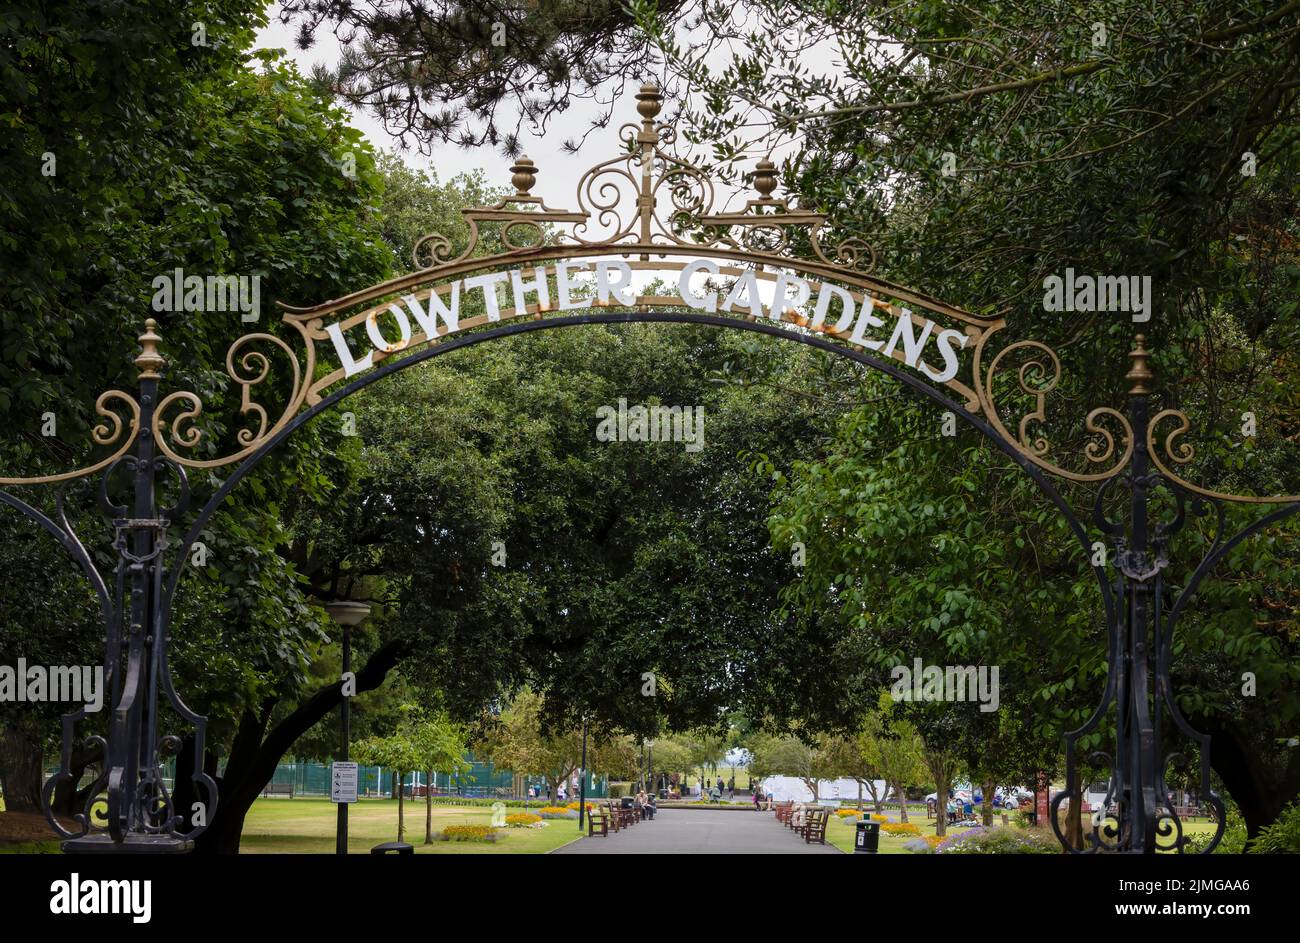 Wrought Iron sign emblazoned Lowther Gardens, marks an entrance into the aforesaid Lowther Gardens in Lytham St Annes, Lancashire, UK Stock Photo